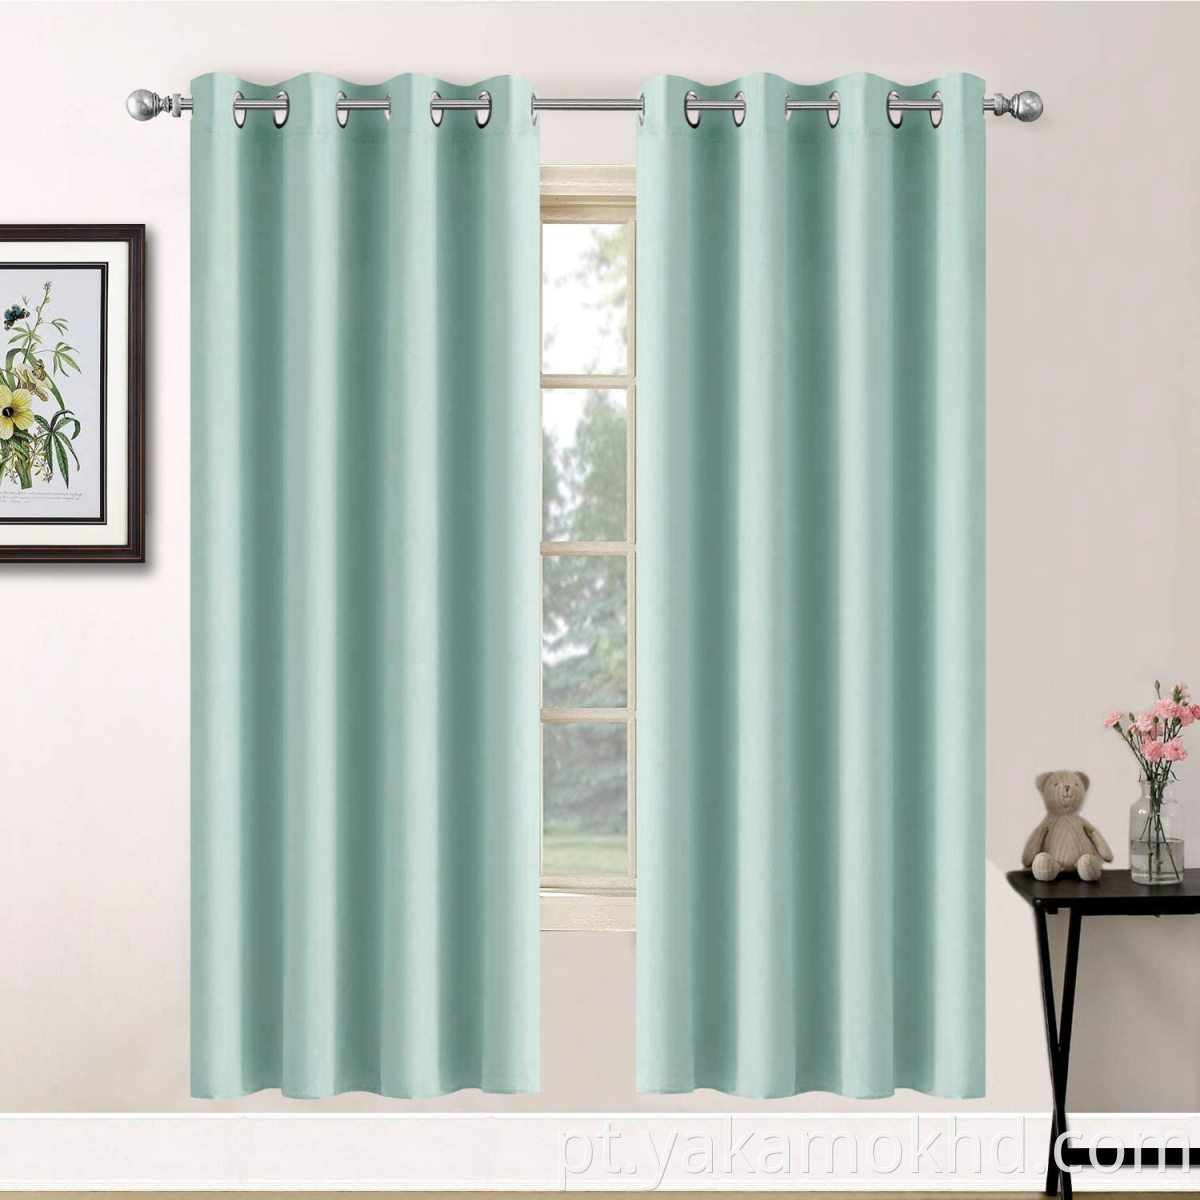 72 Inch Length Blackout Curtains